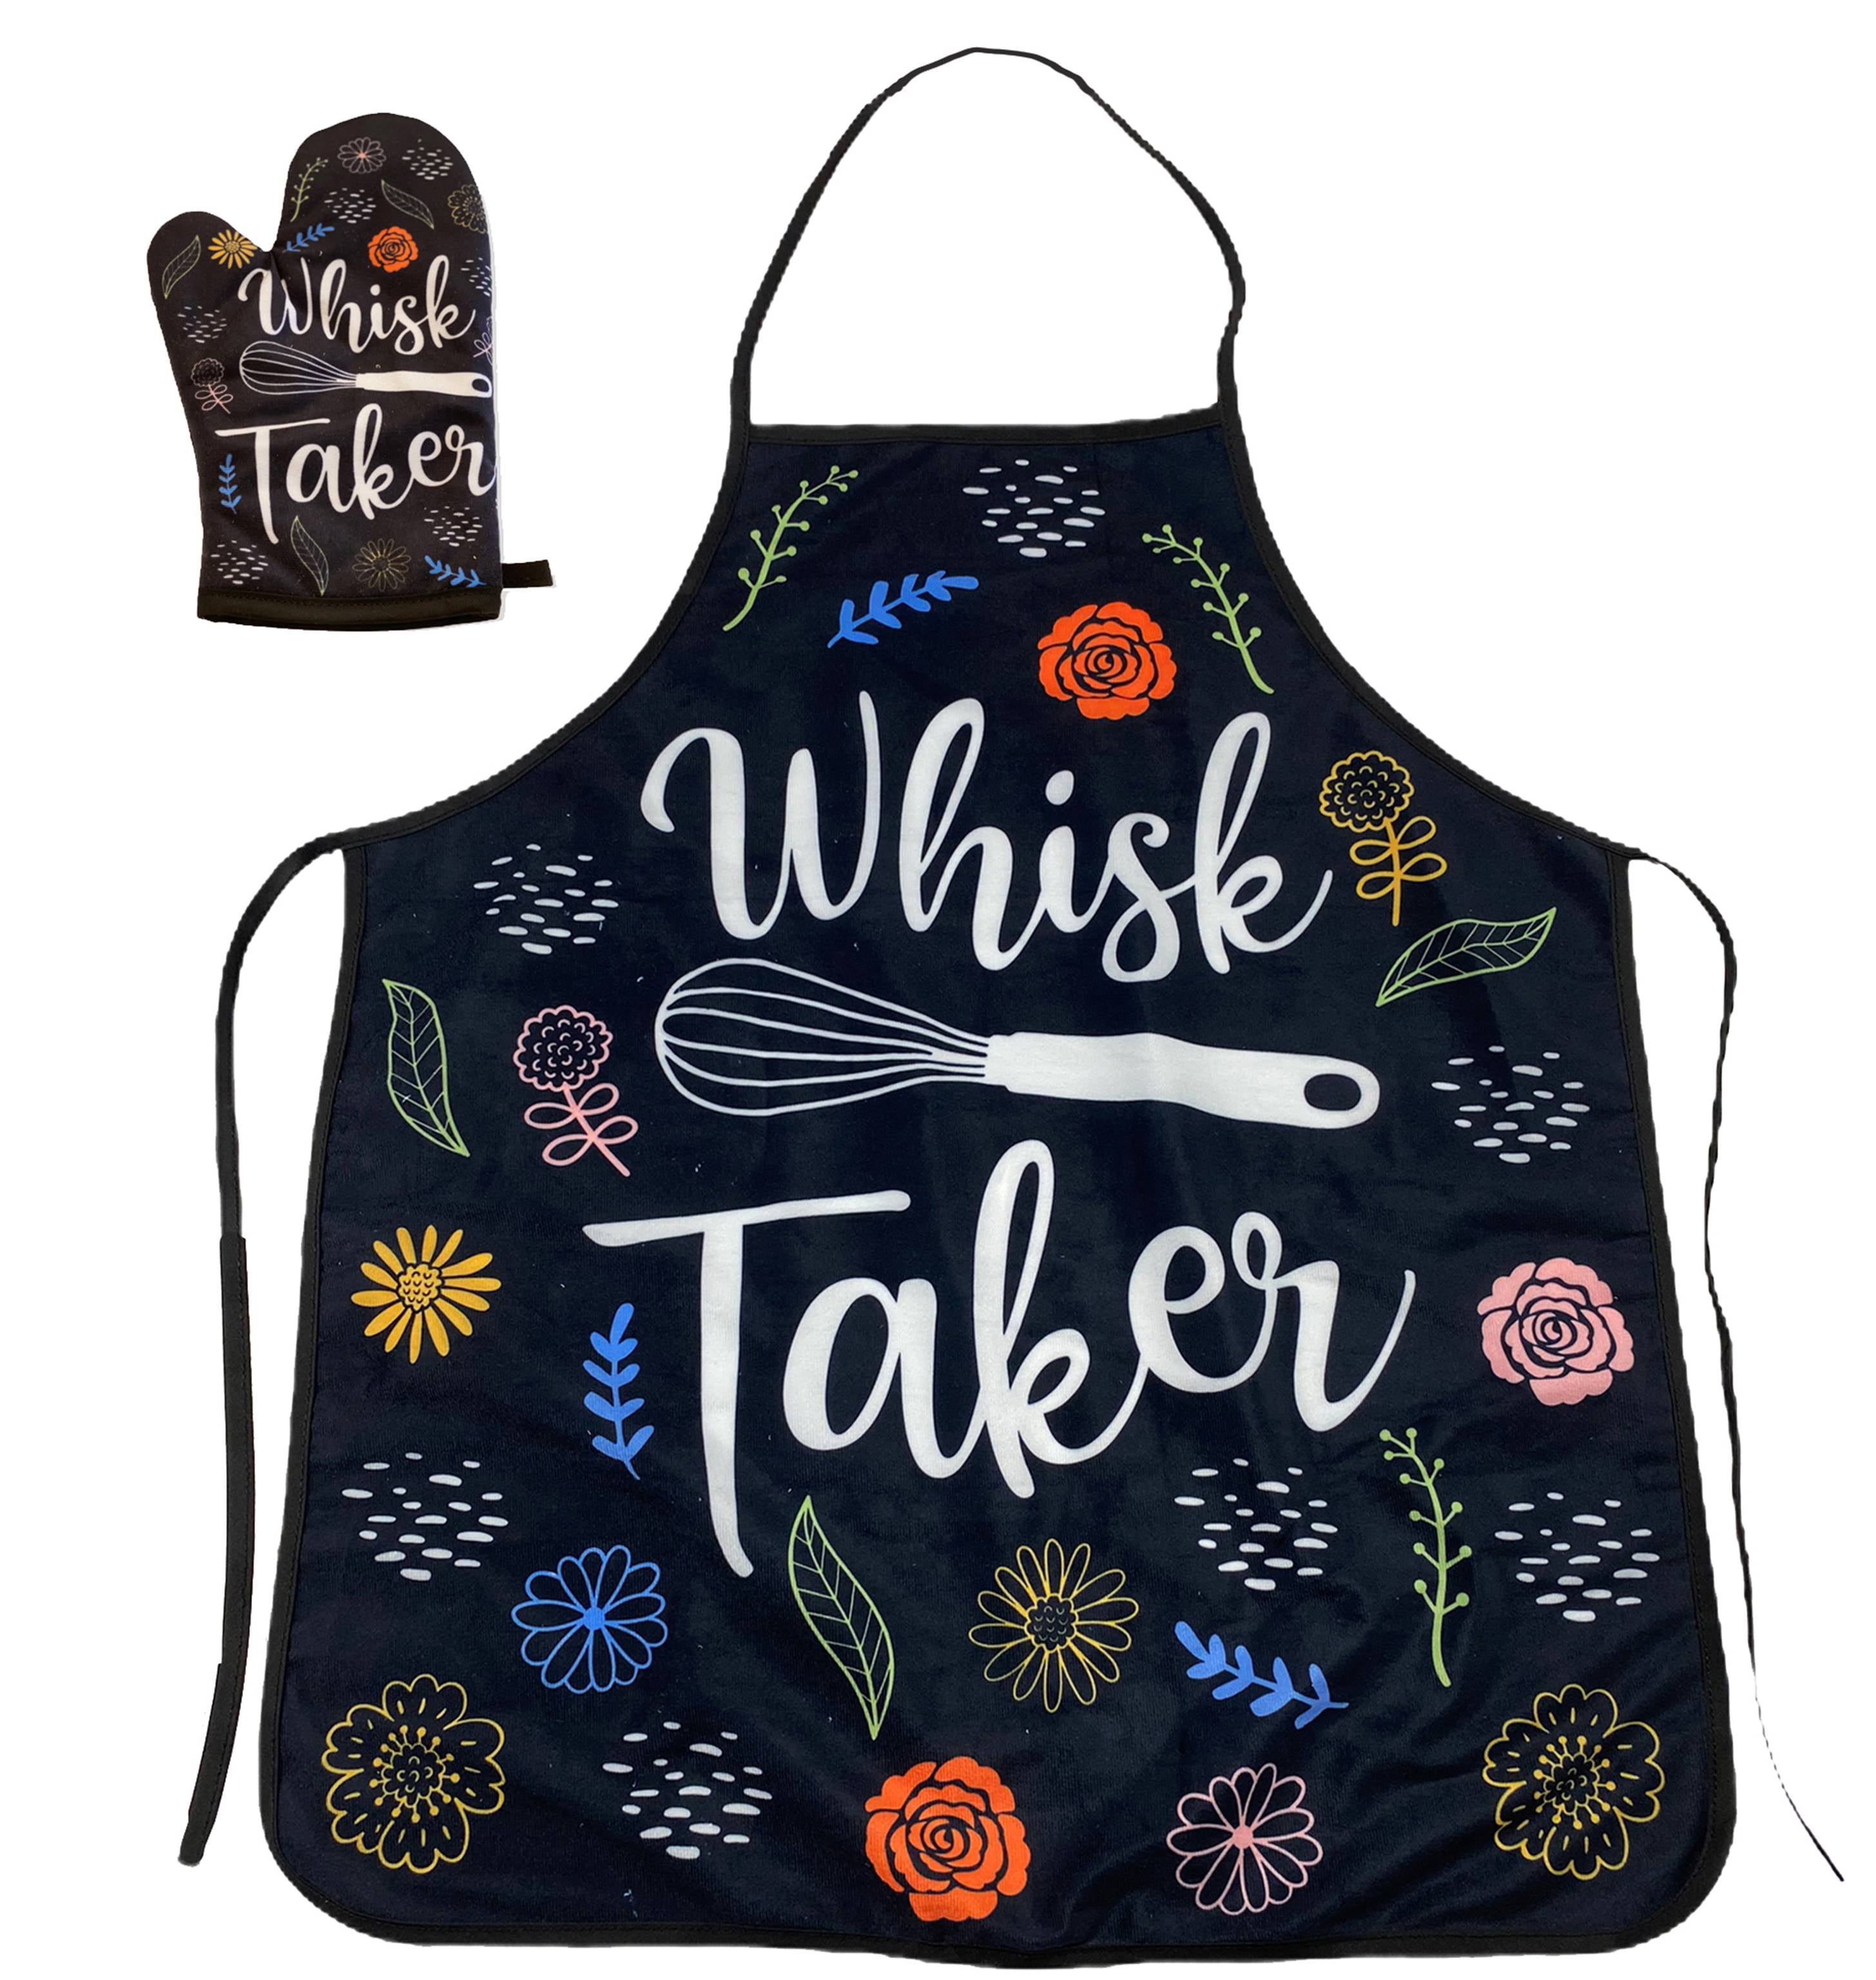 Crazy Dog T-shirts Whisk Taker Funny Kitchen Cooking Baking Graphic Novelty Kitchen Accessories (Apron)